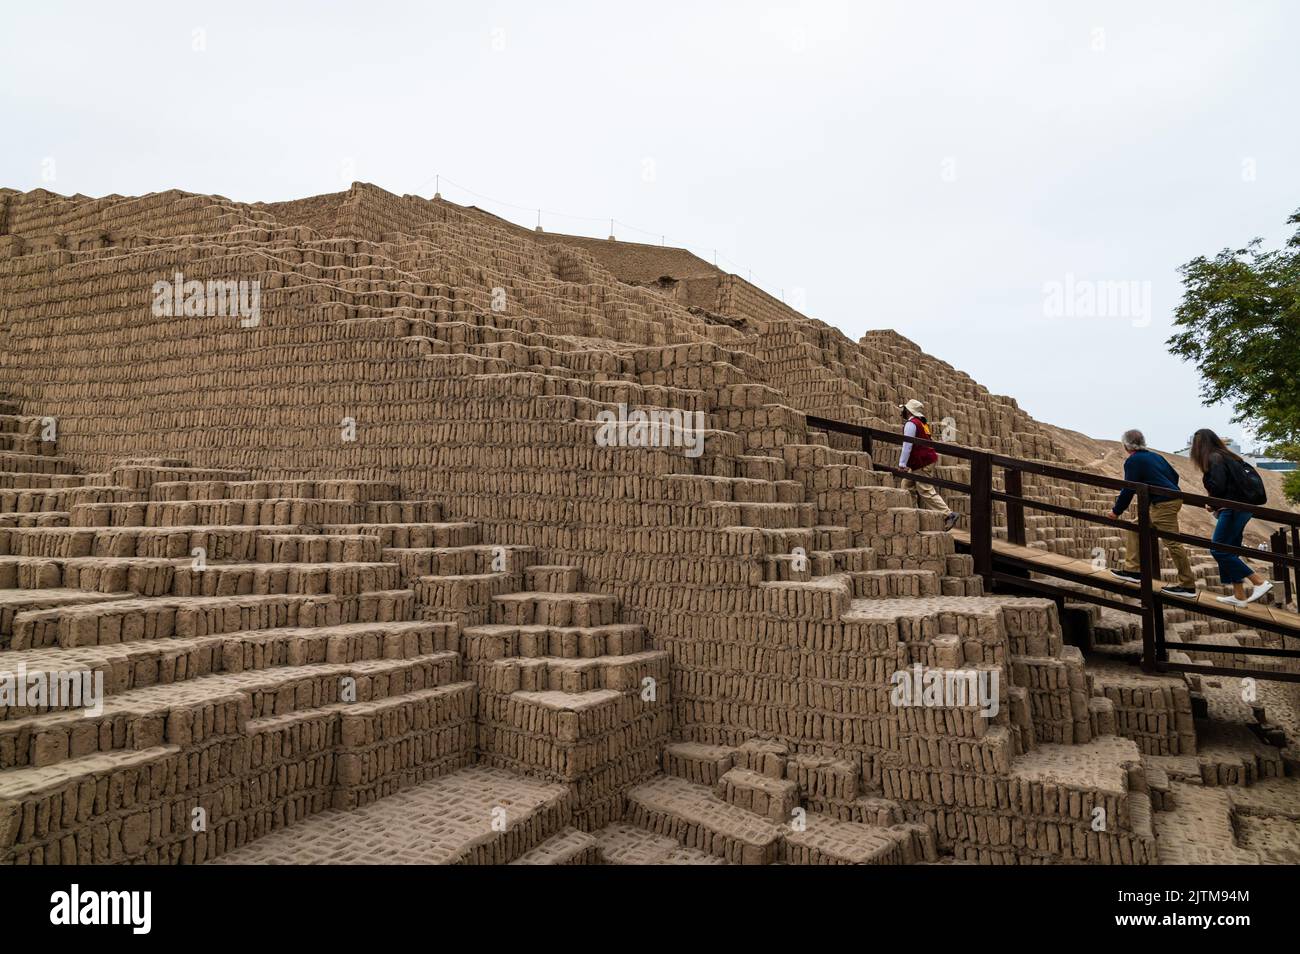 A tour guide leads tourists up the steps of the pyramid section of the Huaca Pucllana historical ruins site. The complex is located in Miraflores. Stock Photo